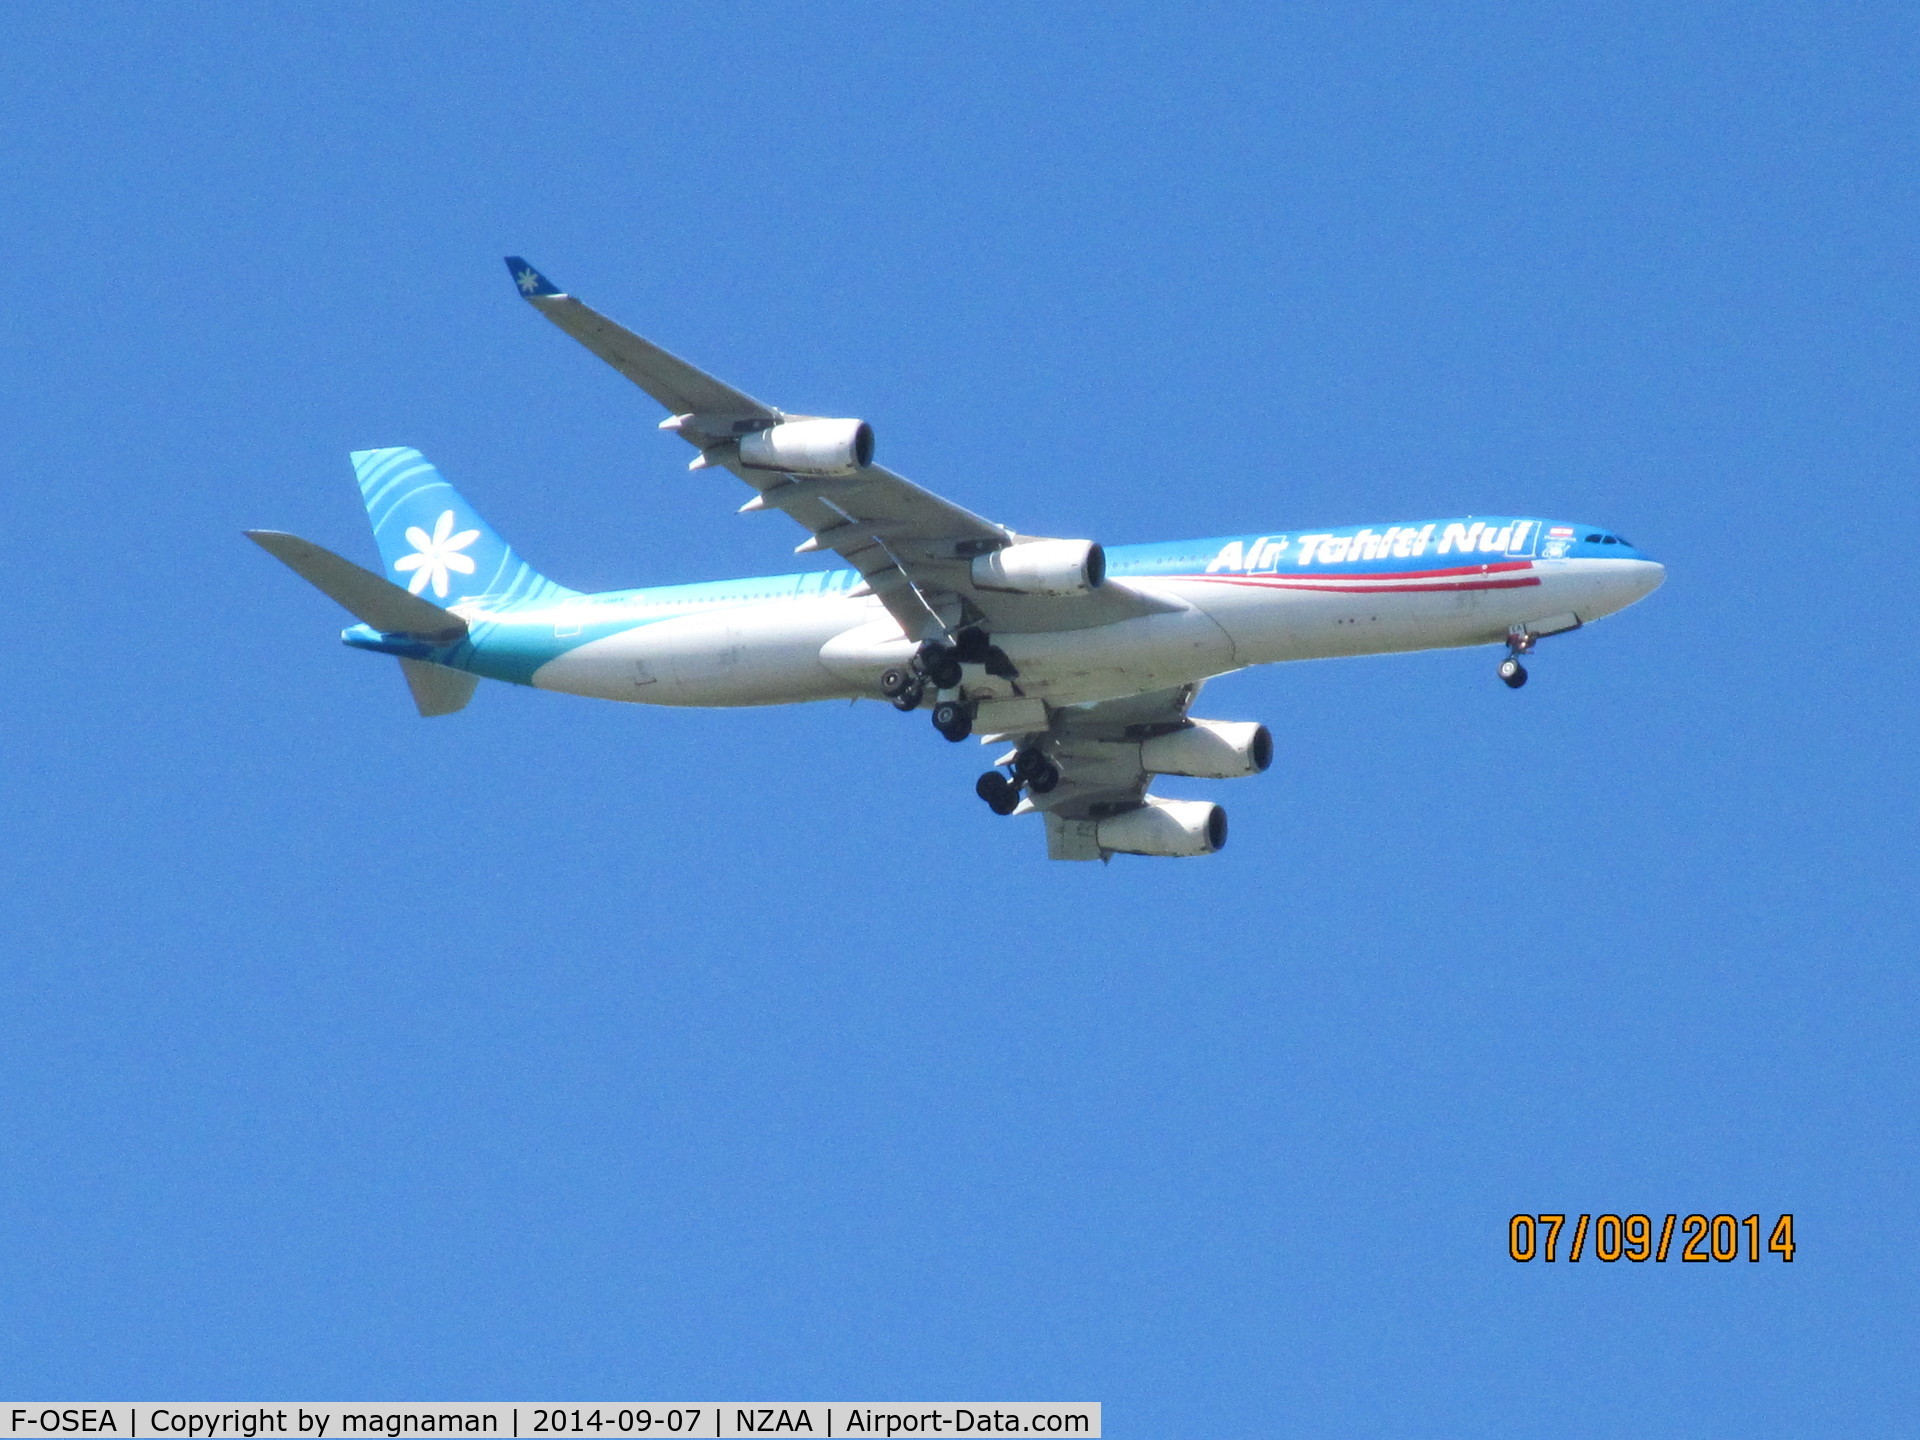 F-OSEA, 2001 Airbus A340-313 C/N 438, landing at AKL today - overhead flat bush